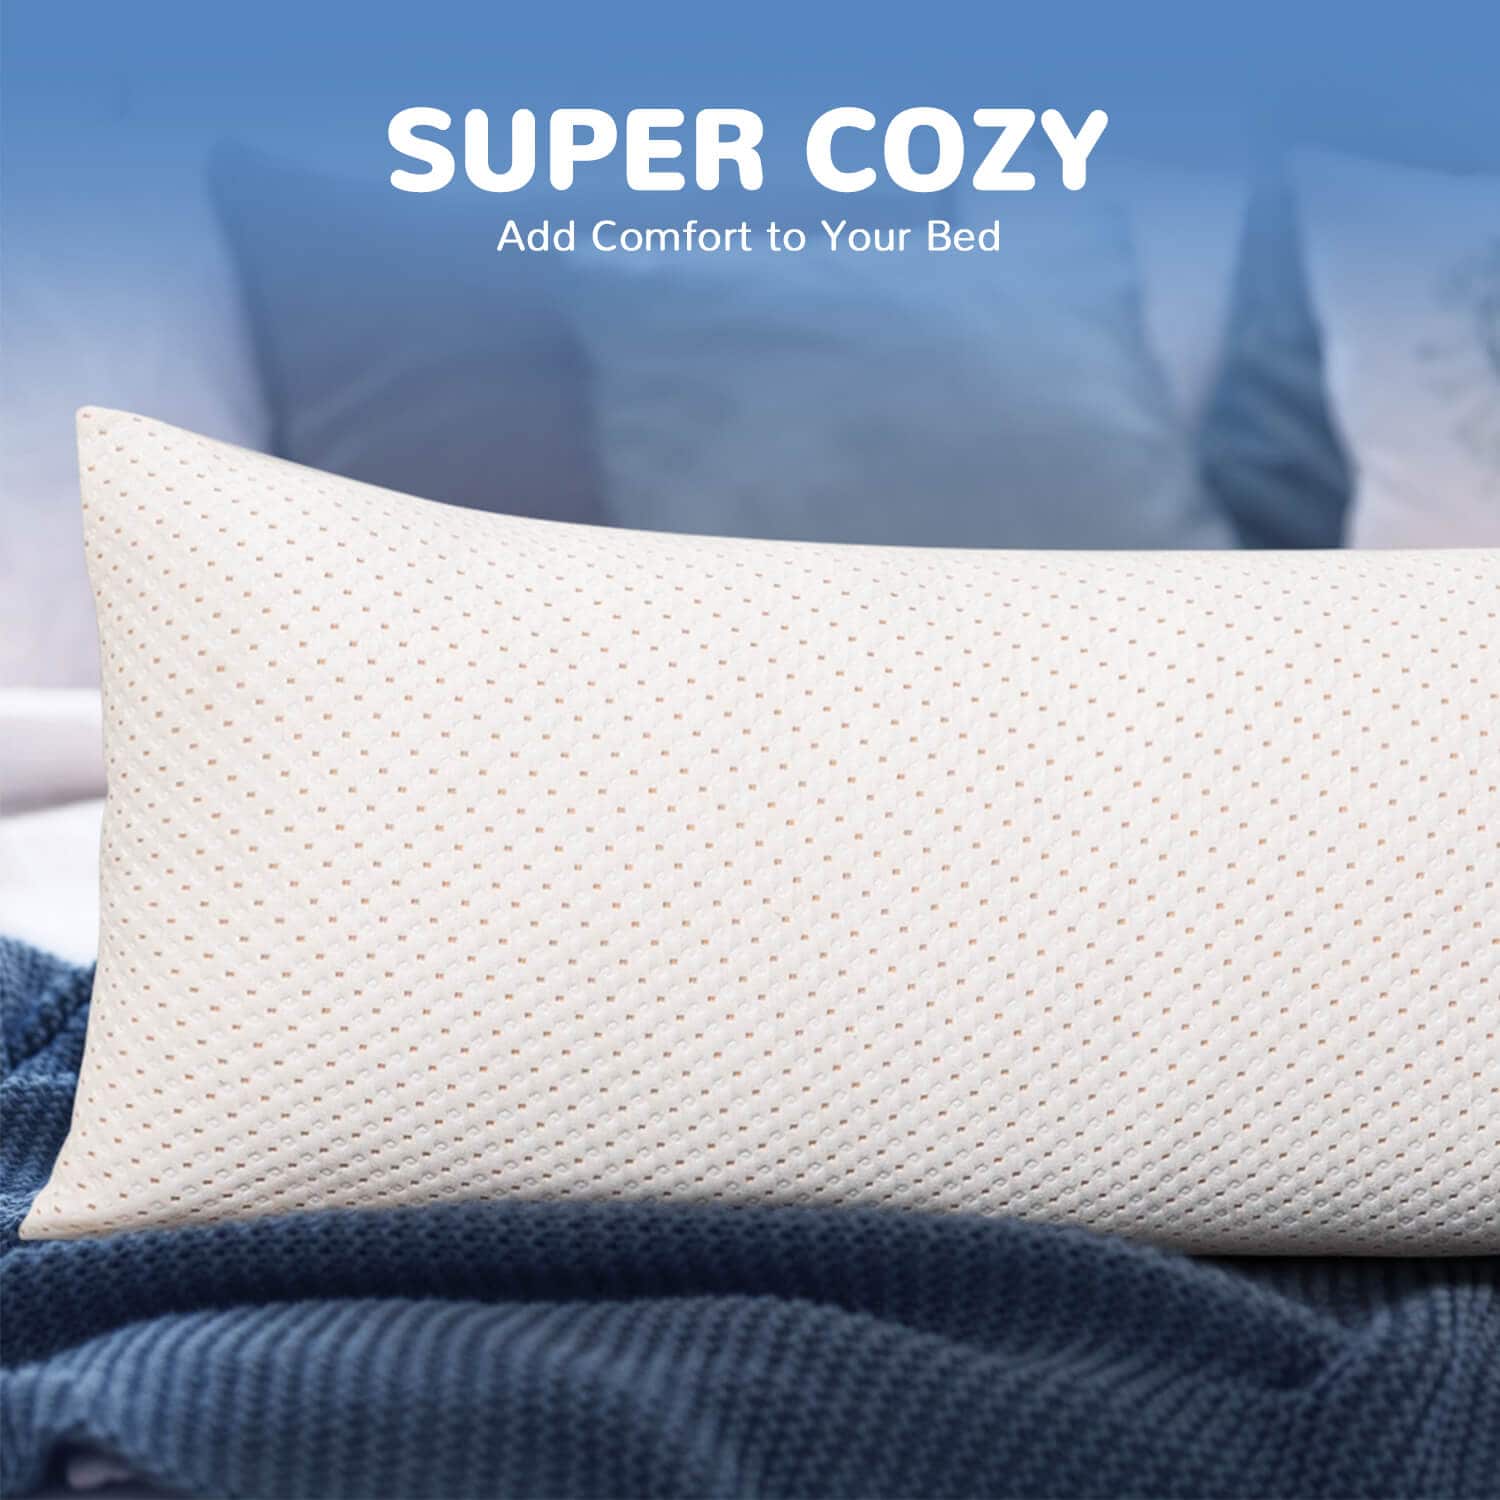 Full Body Pillow for Adults - Shredded Memory Foam &amp; Zippered Cooling Bamboo Cover - Long Pillow for Sleeping - Bed Pillows for Side Sleeper